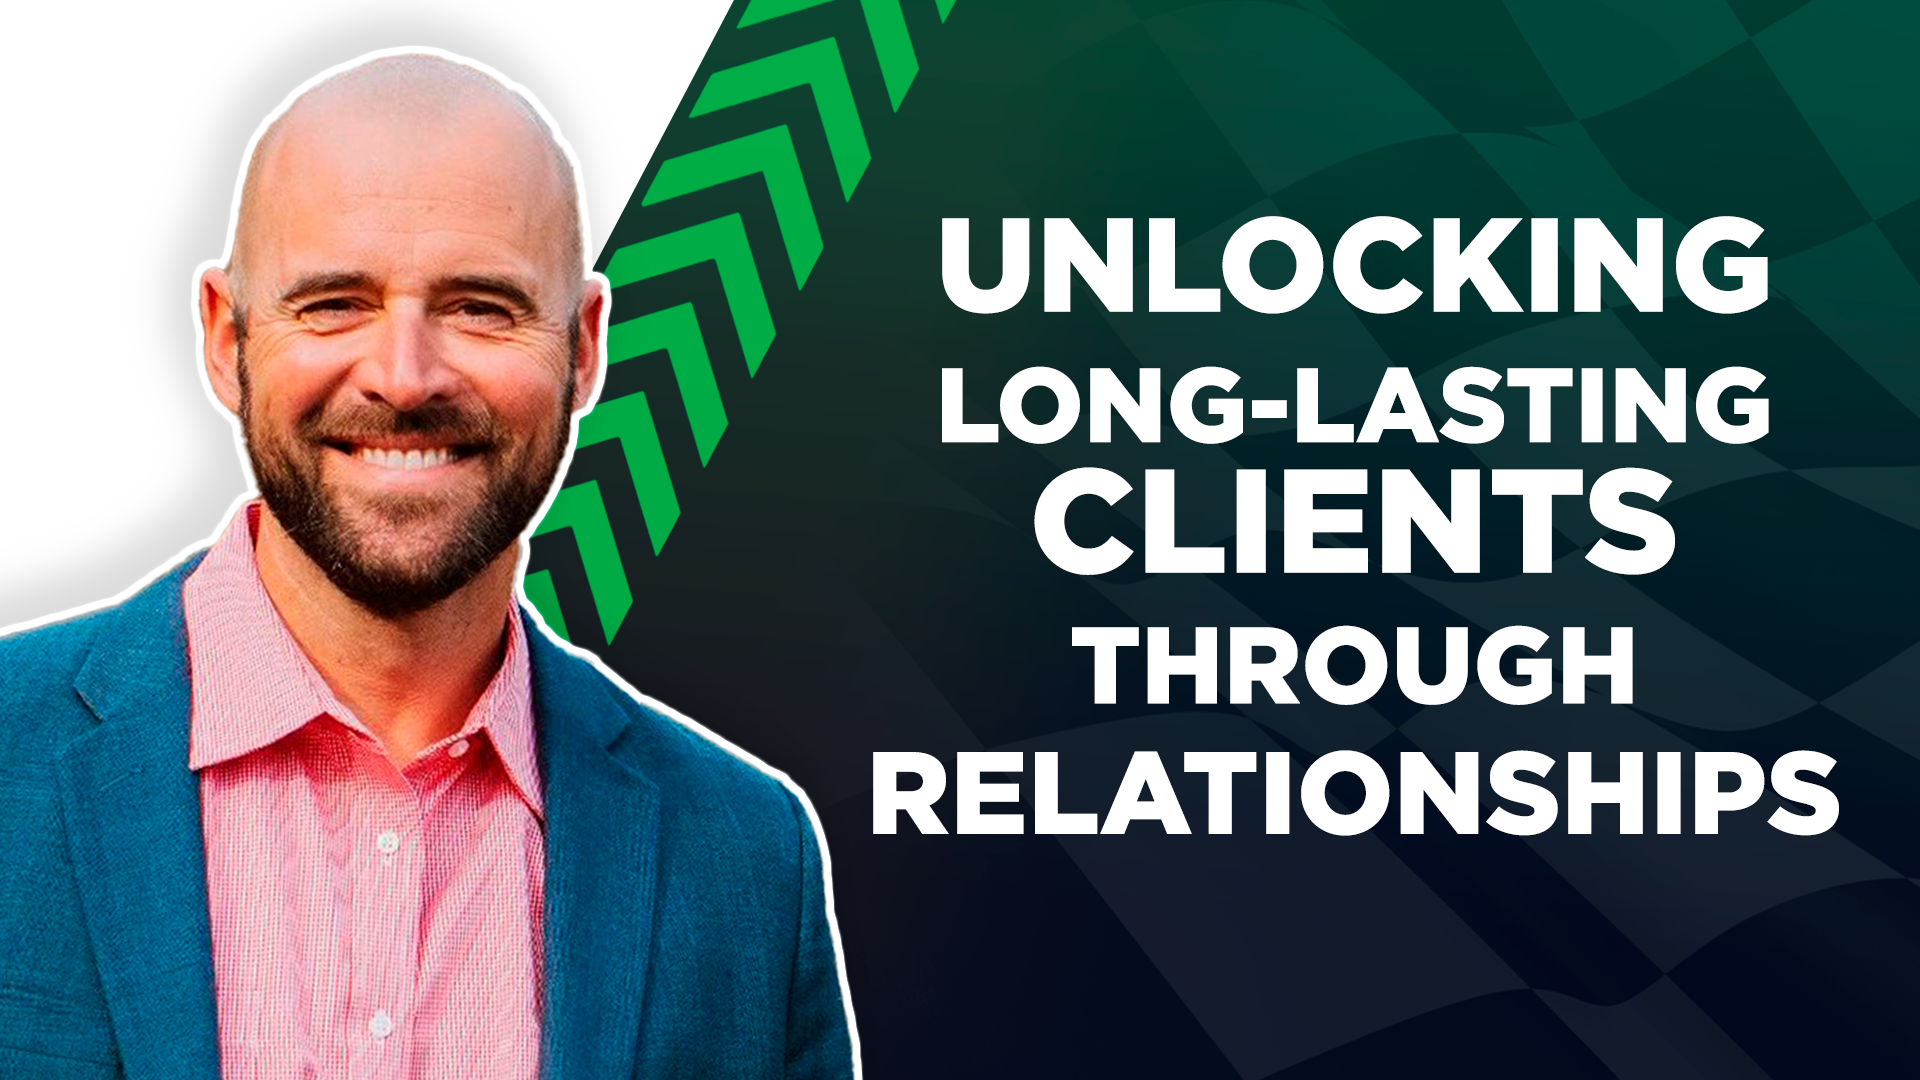 Podcast Pit Stop: Casey Jacox on Unlocking Long-Lasting Clients Through Relationships